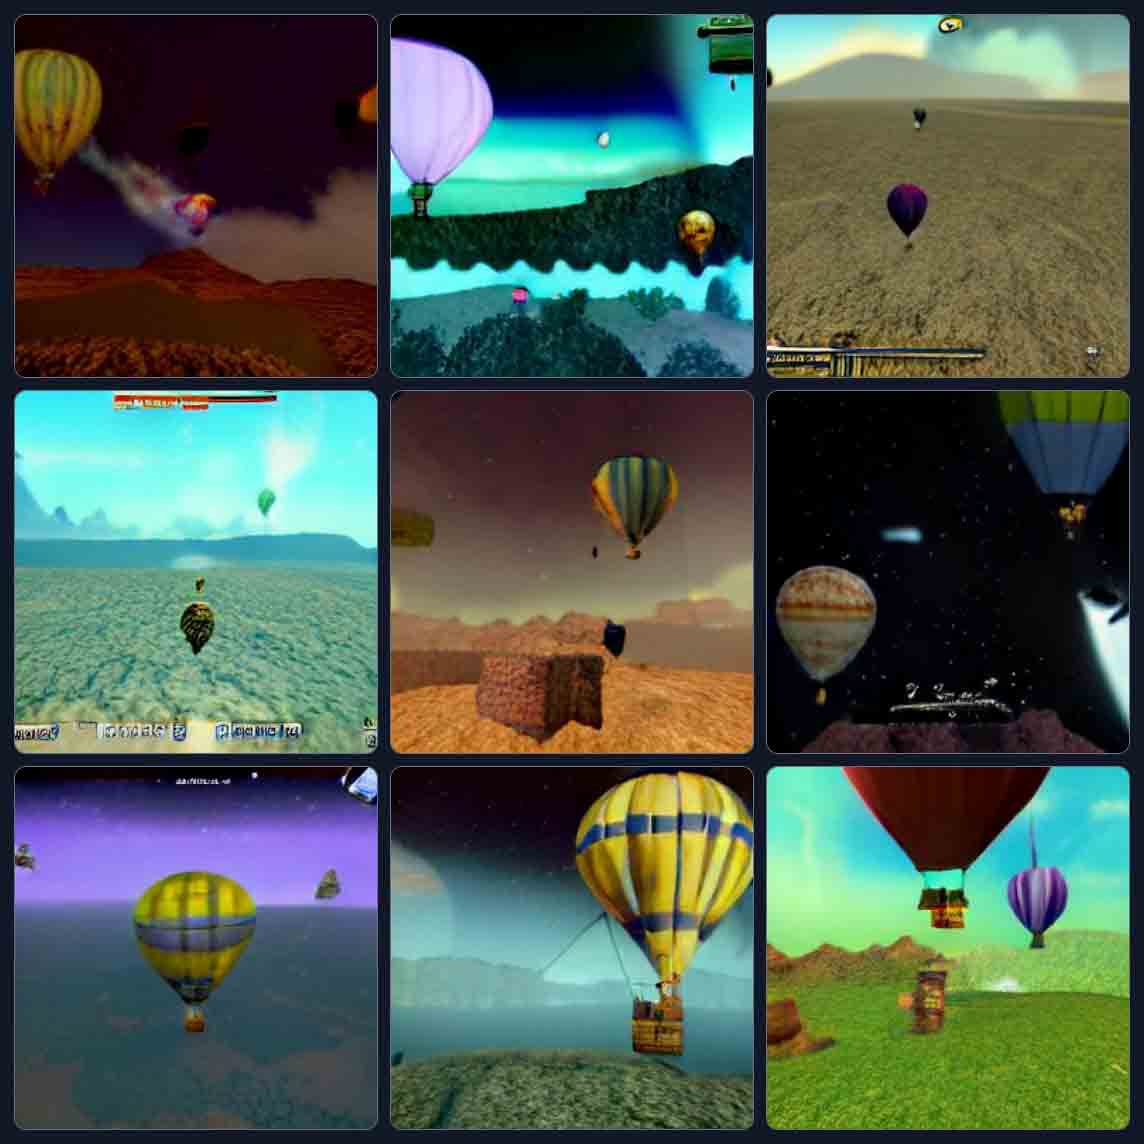 9 images showing vastly different view of hot air balloons. Each is seen as if through a wide angle lens common to video games. The skies and ground are almost all clearly Earth, in a graphics style that feels like a video game. One set of balloons is in space, another apparently in a blocky desert Minecraft world. Most of the images have vestiges of status bars and radar maps at the edges. None of them has any text.